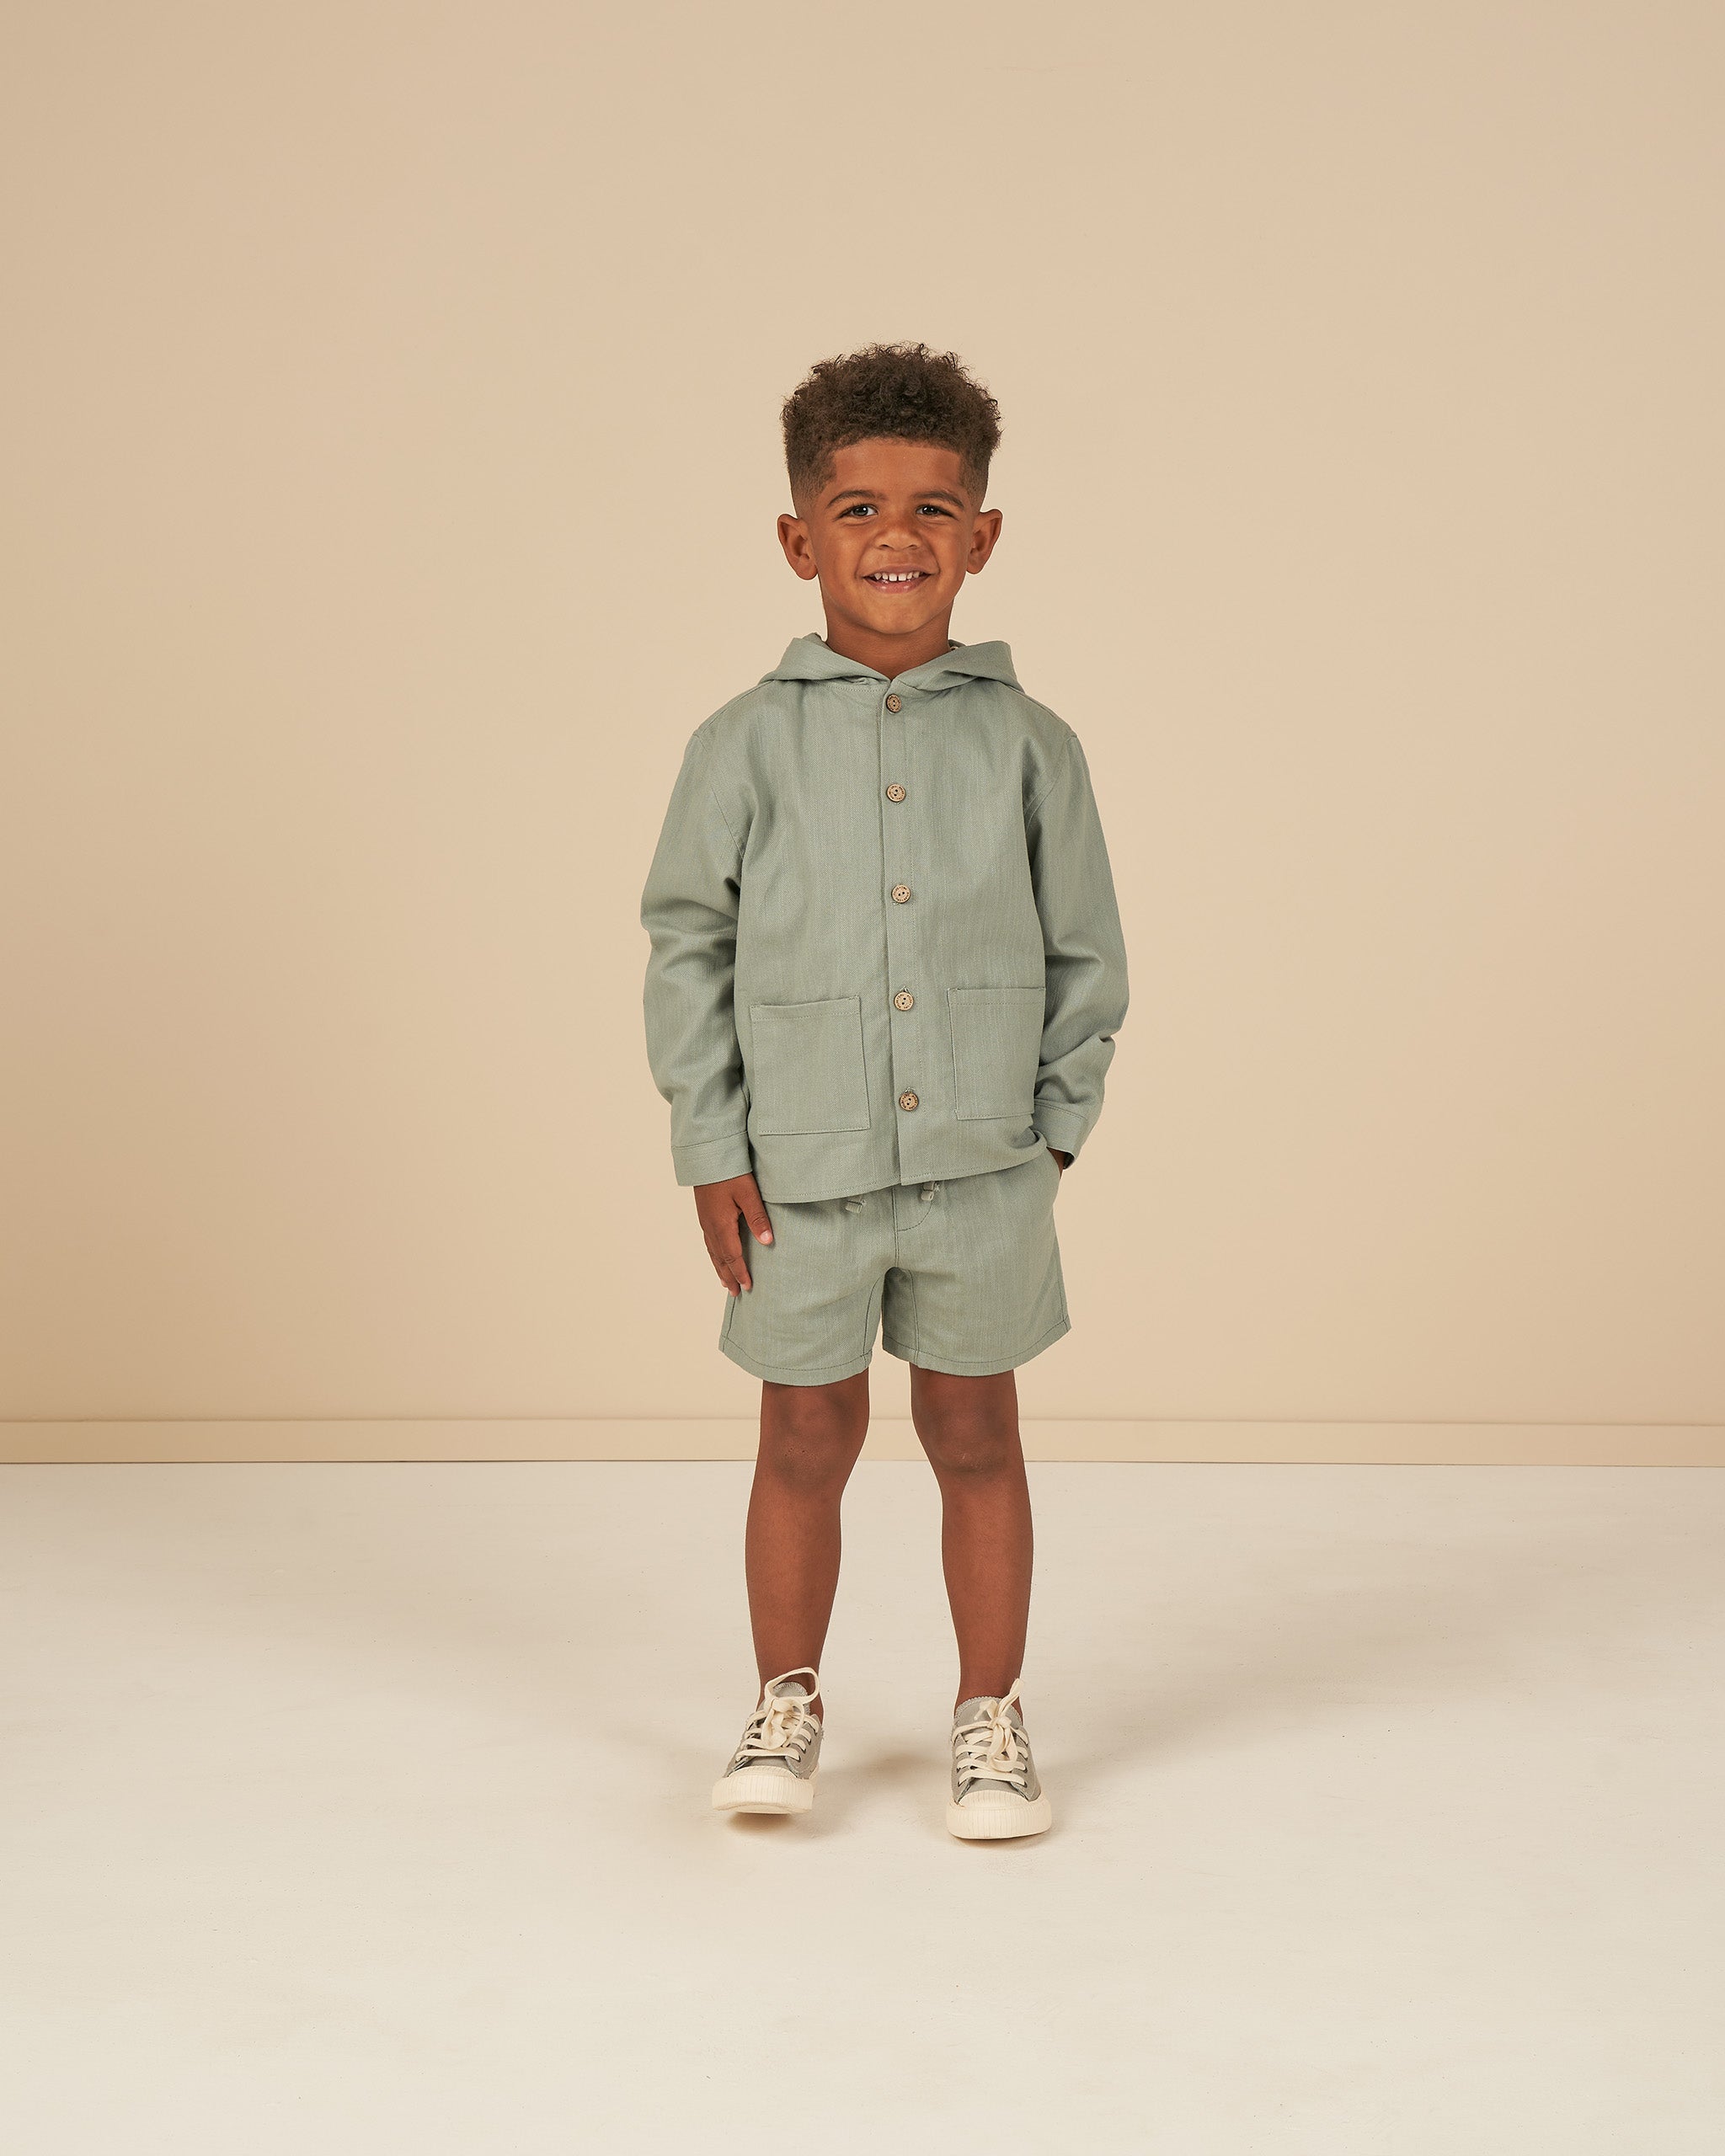 Bermuda Short || Aqua - Rylee + Cru | Kids Clothes | Trendy Baby Clothes | Modern Infant Outfits |